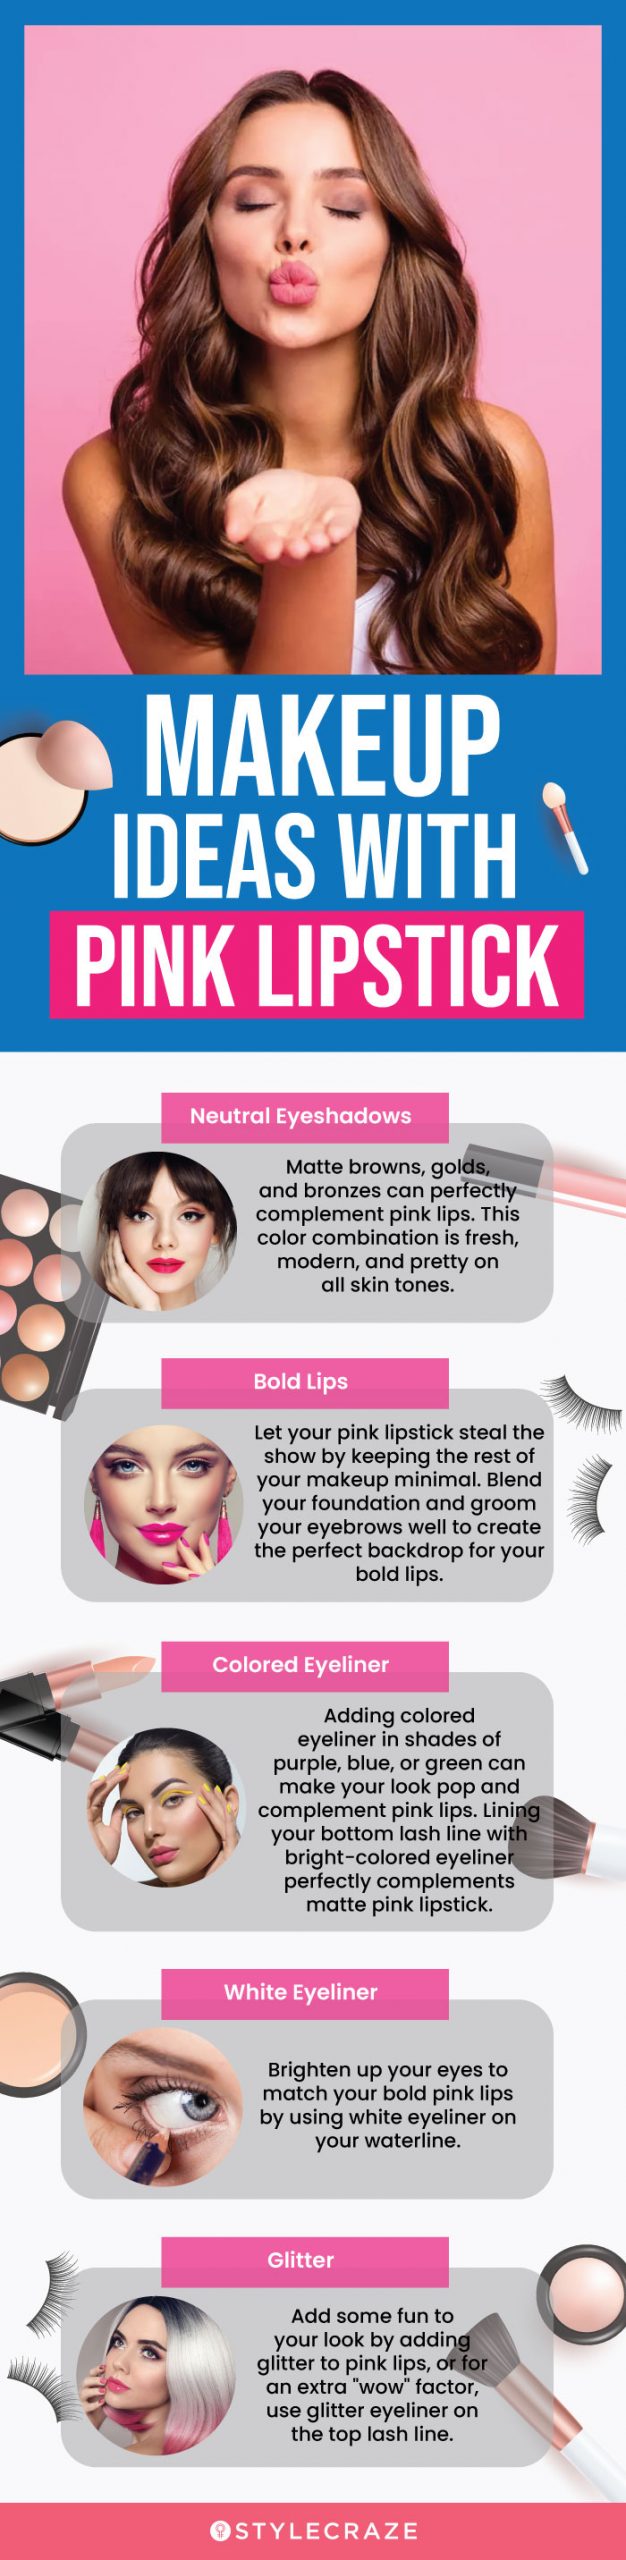 Makeup Ideas With Pink Lipstick (infographic)